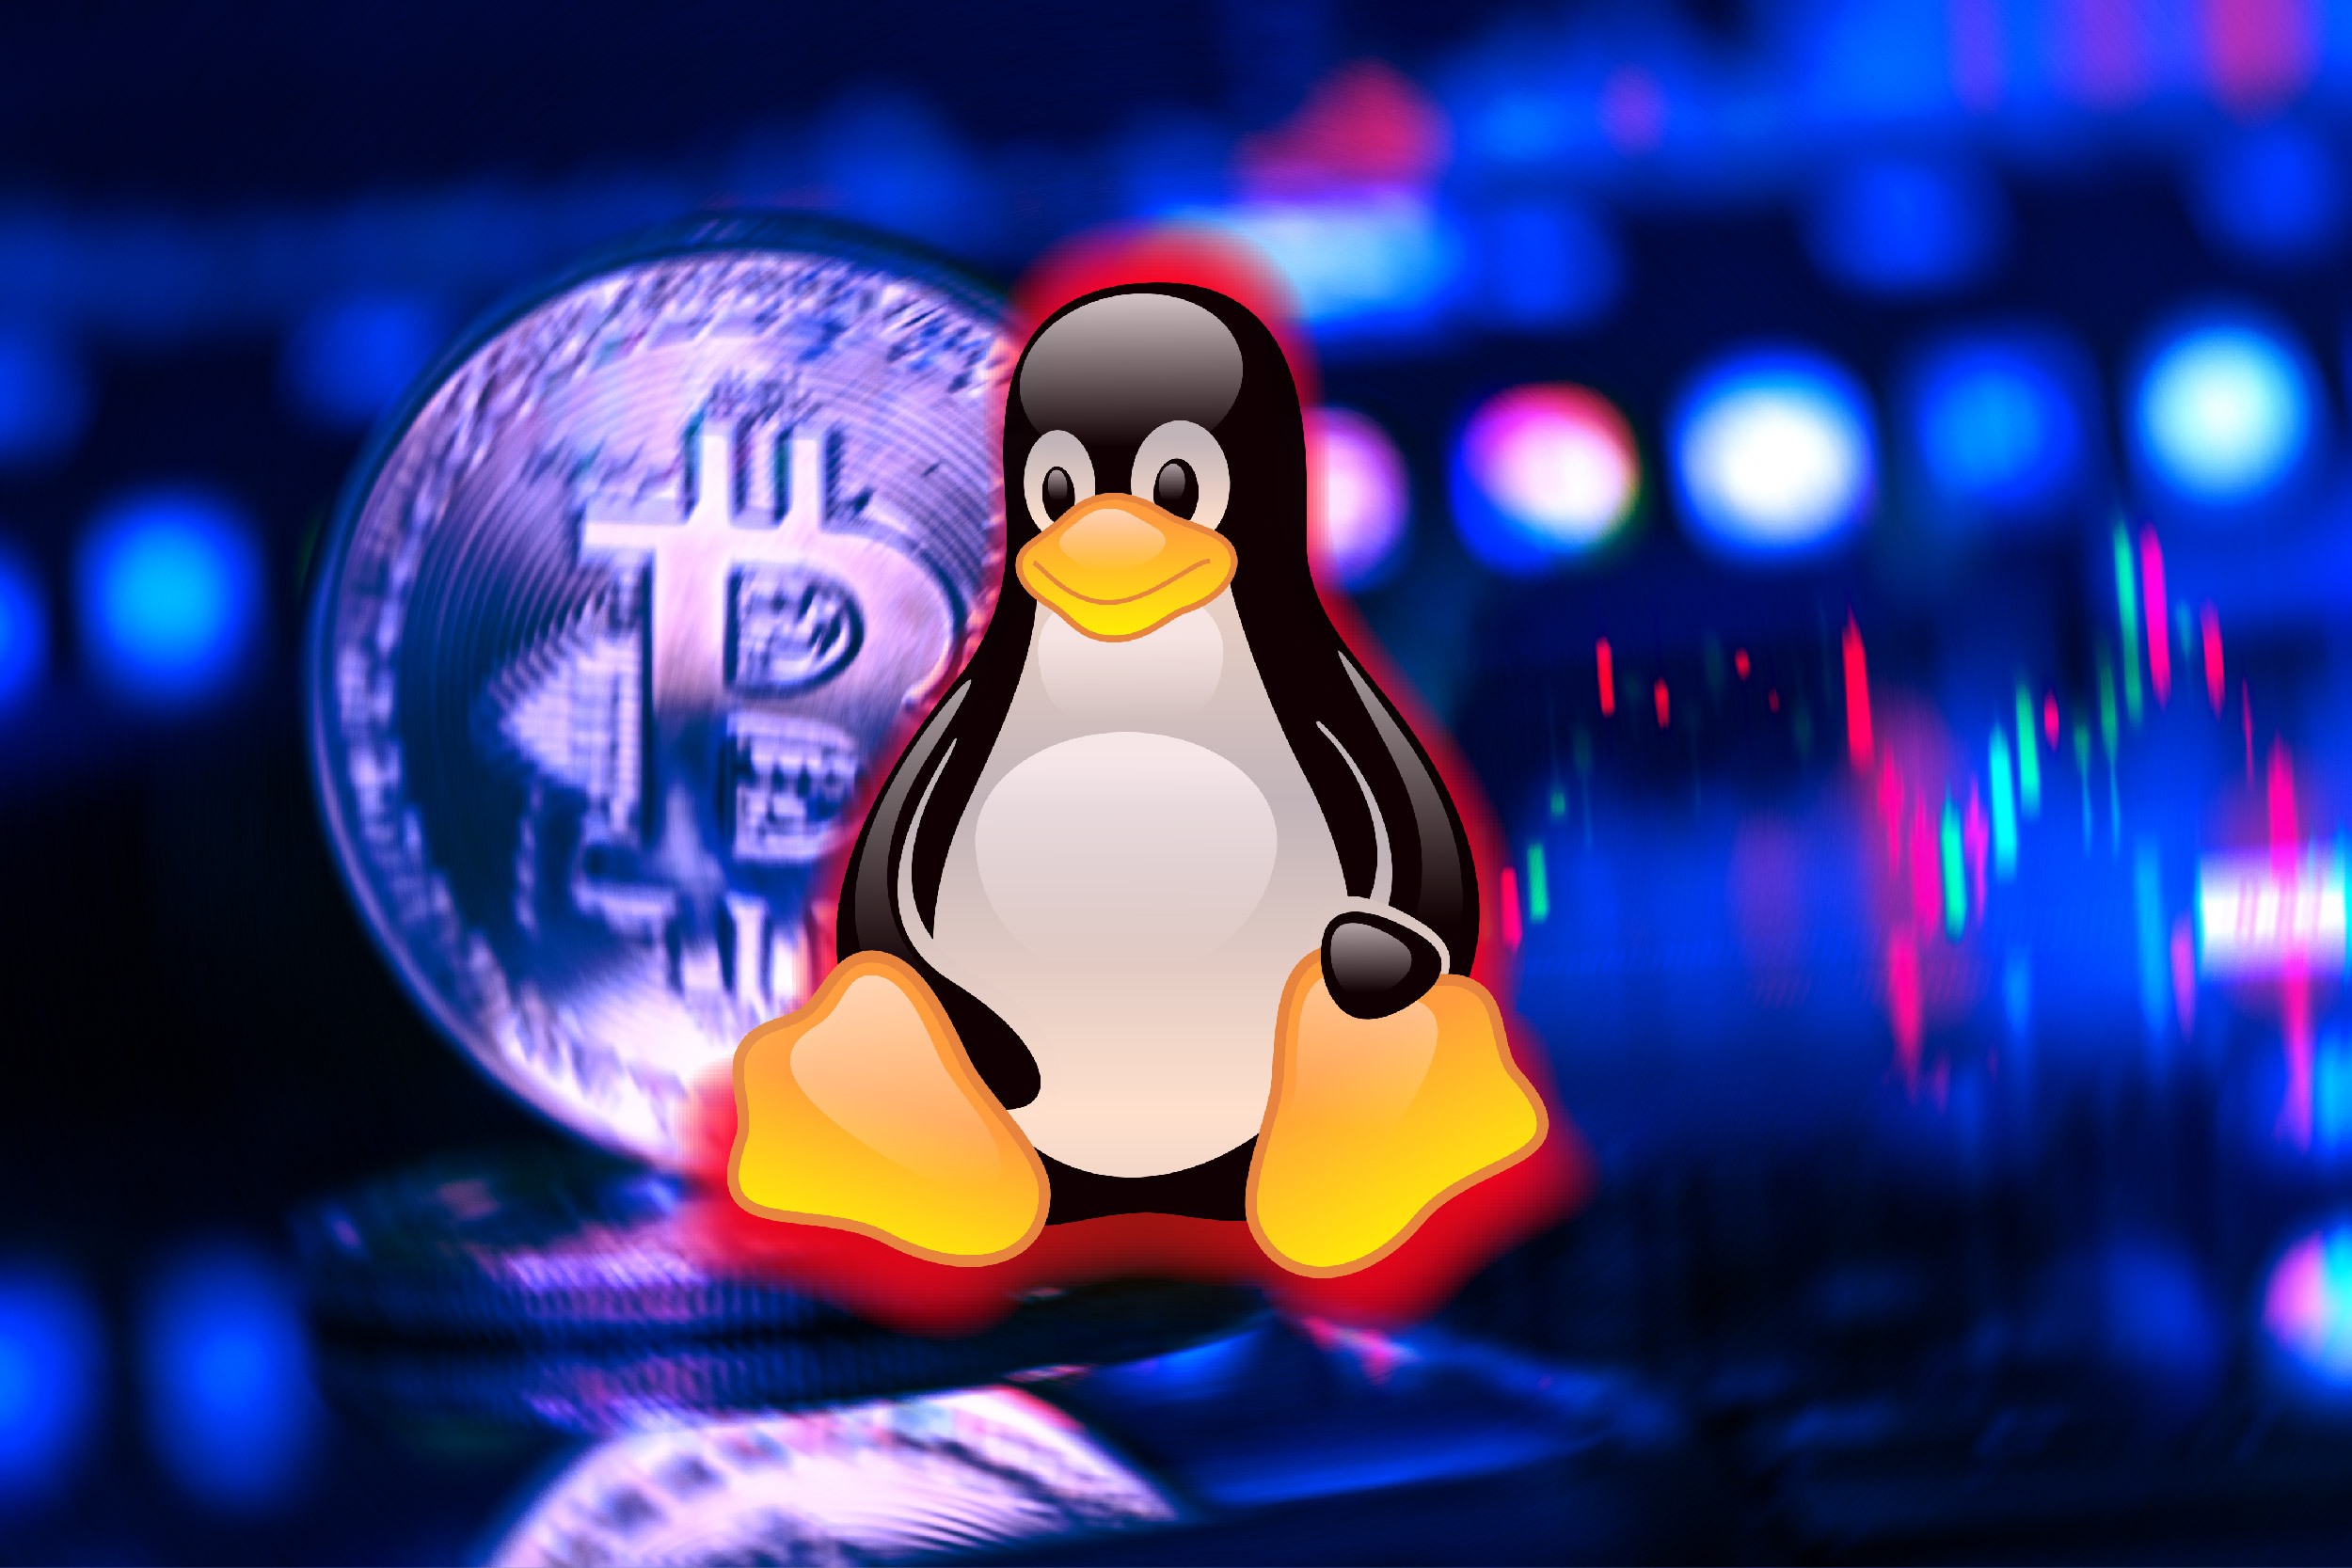 Researchers Found New Cryptojacking Campaign Targeting Linux Machines